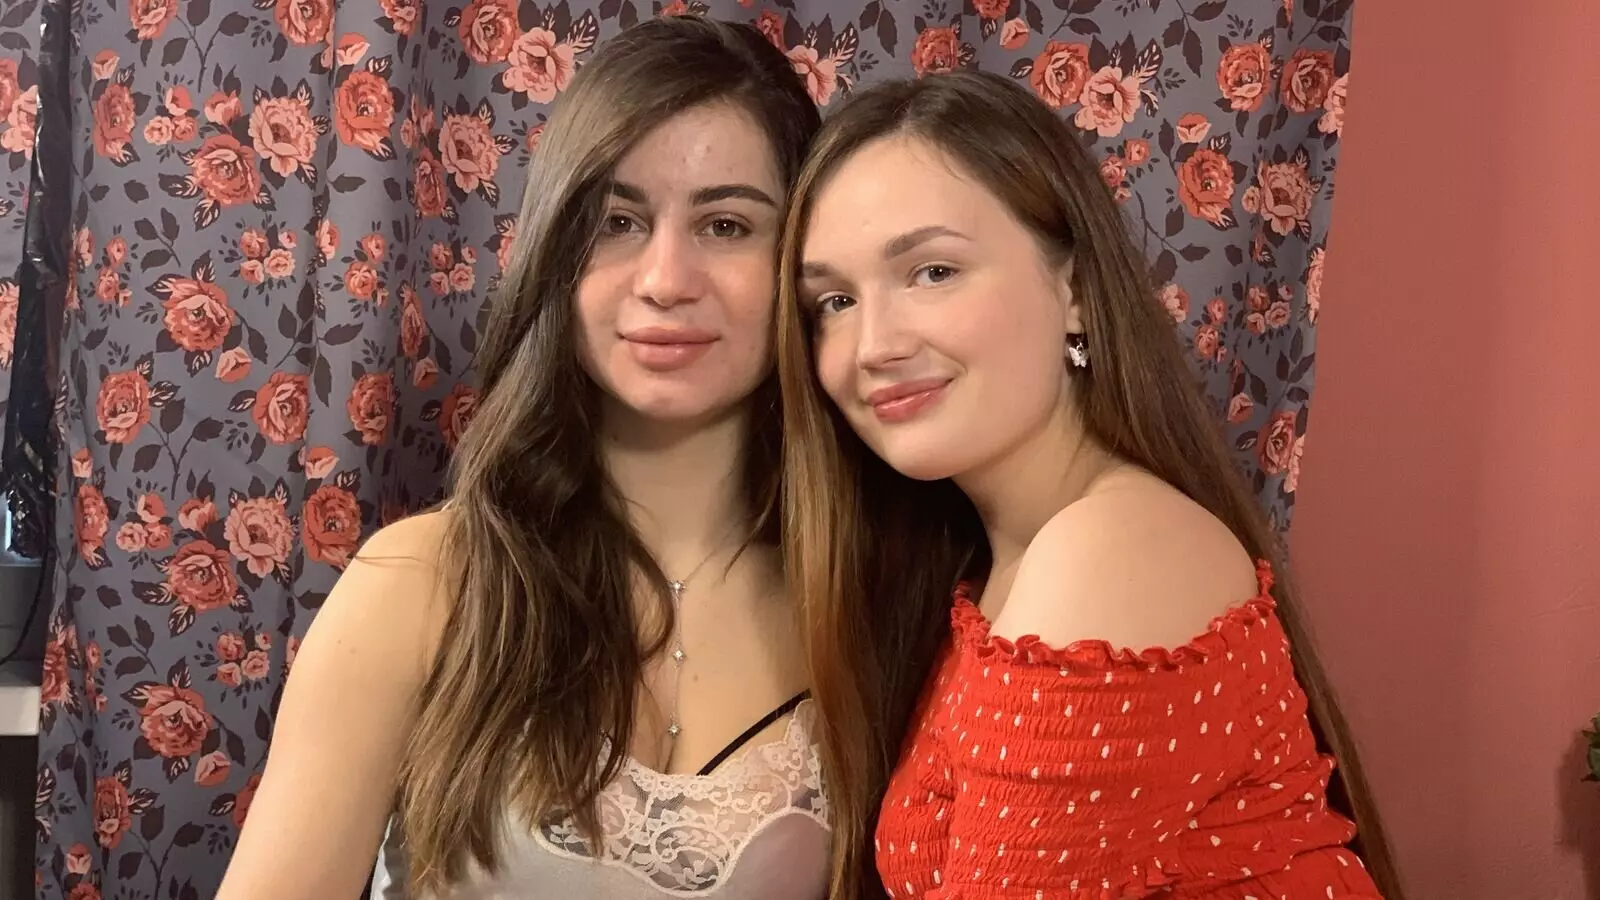  RELATED VIDEOS - WEBCAM GwenAndMabbe STRIPS AND MASTURBATES